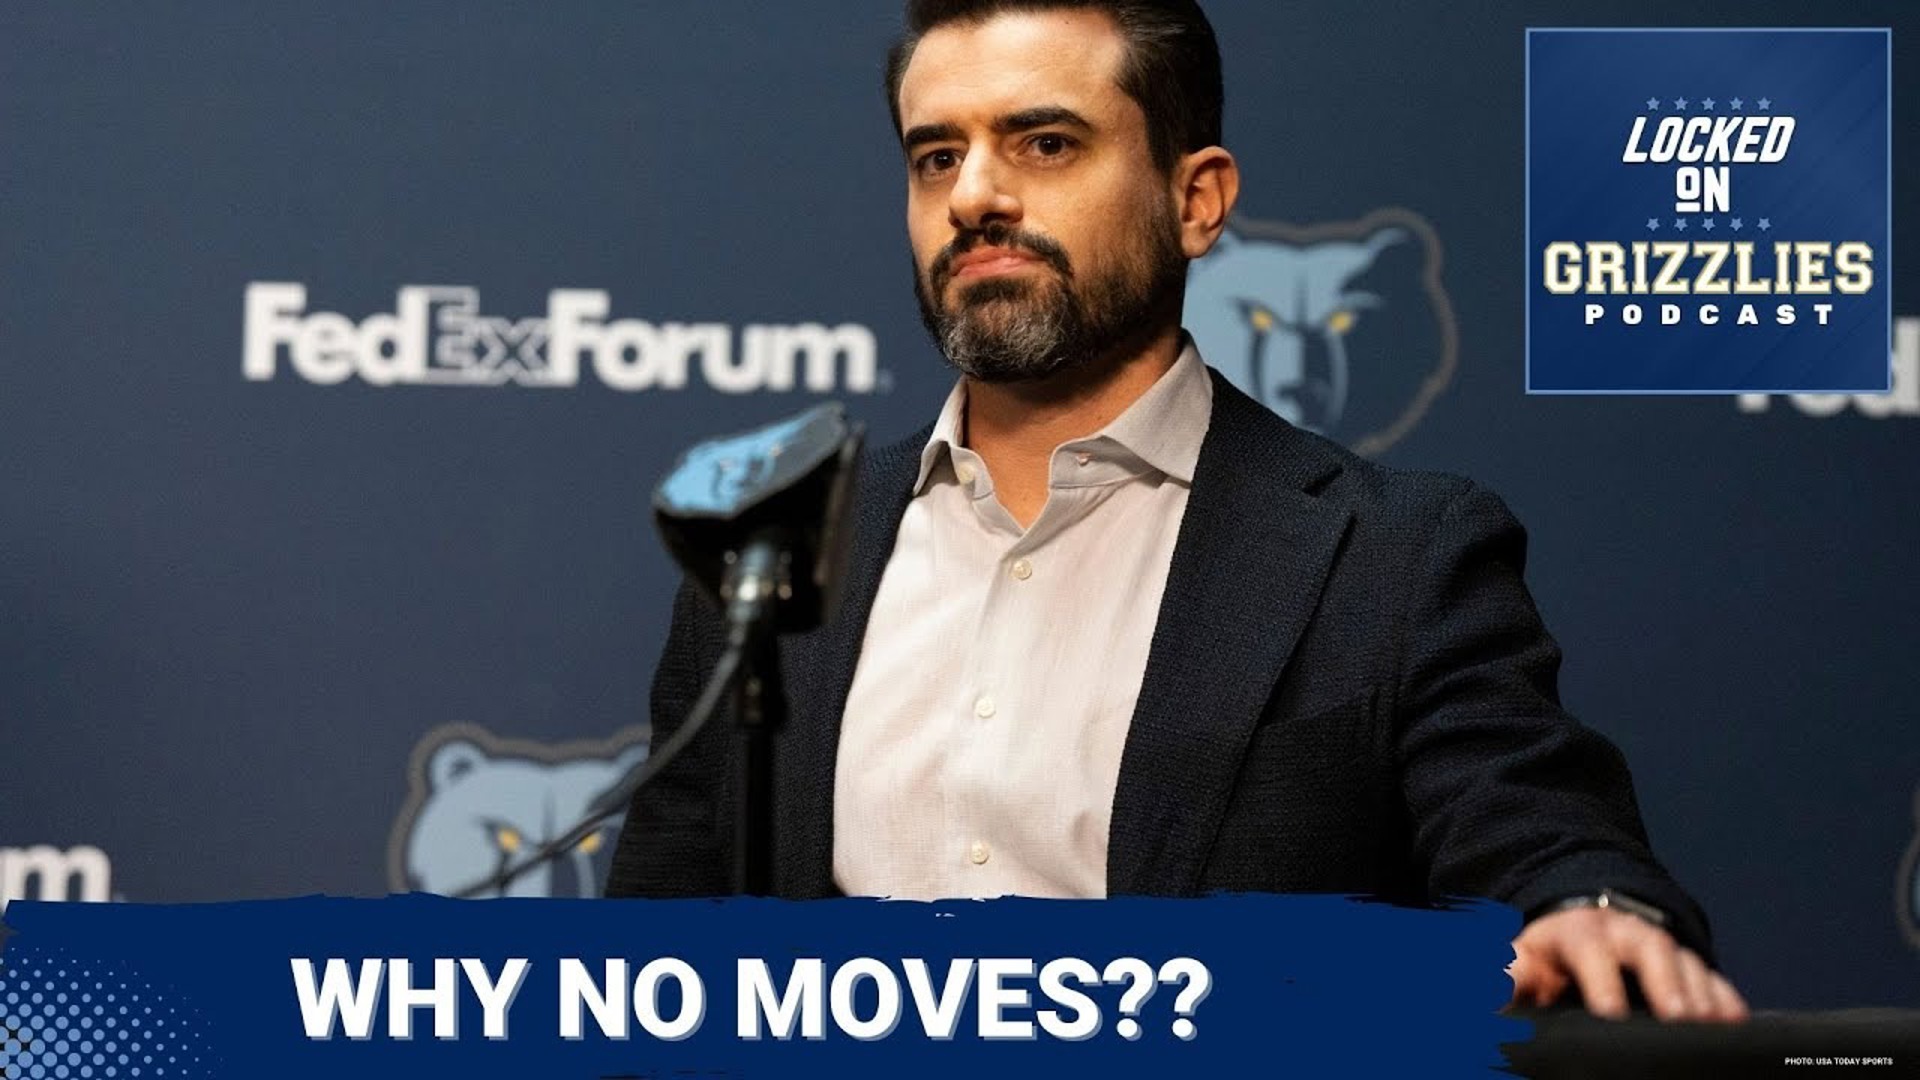 Three days into free agency, the Memphis Grizzlies have not made a move.